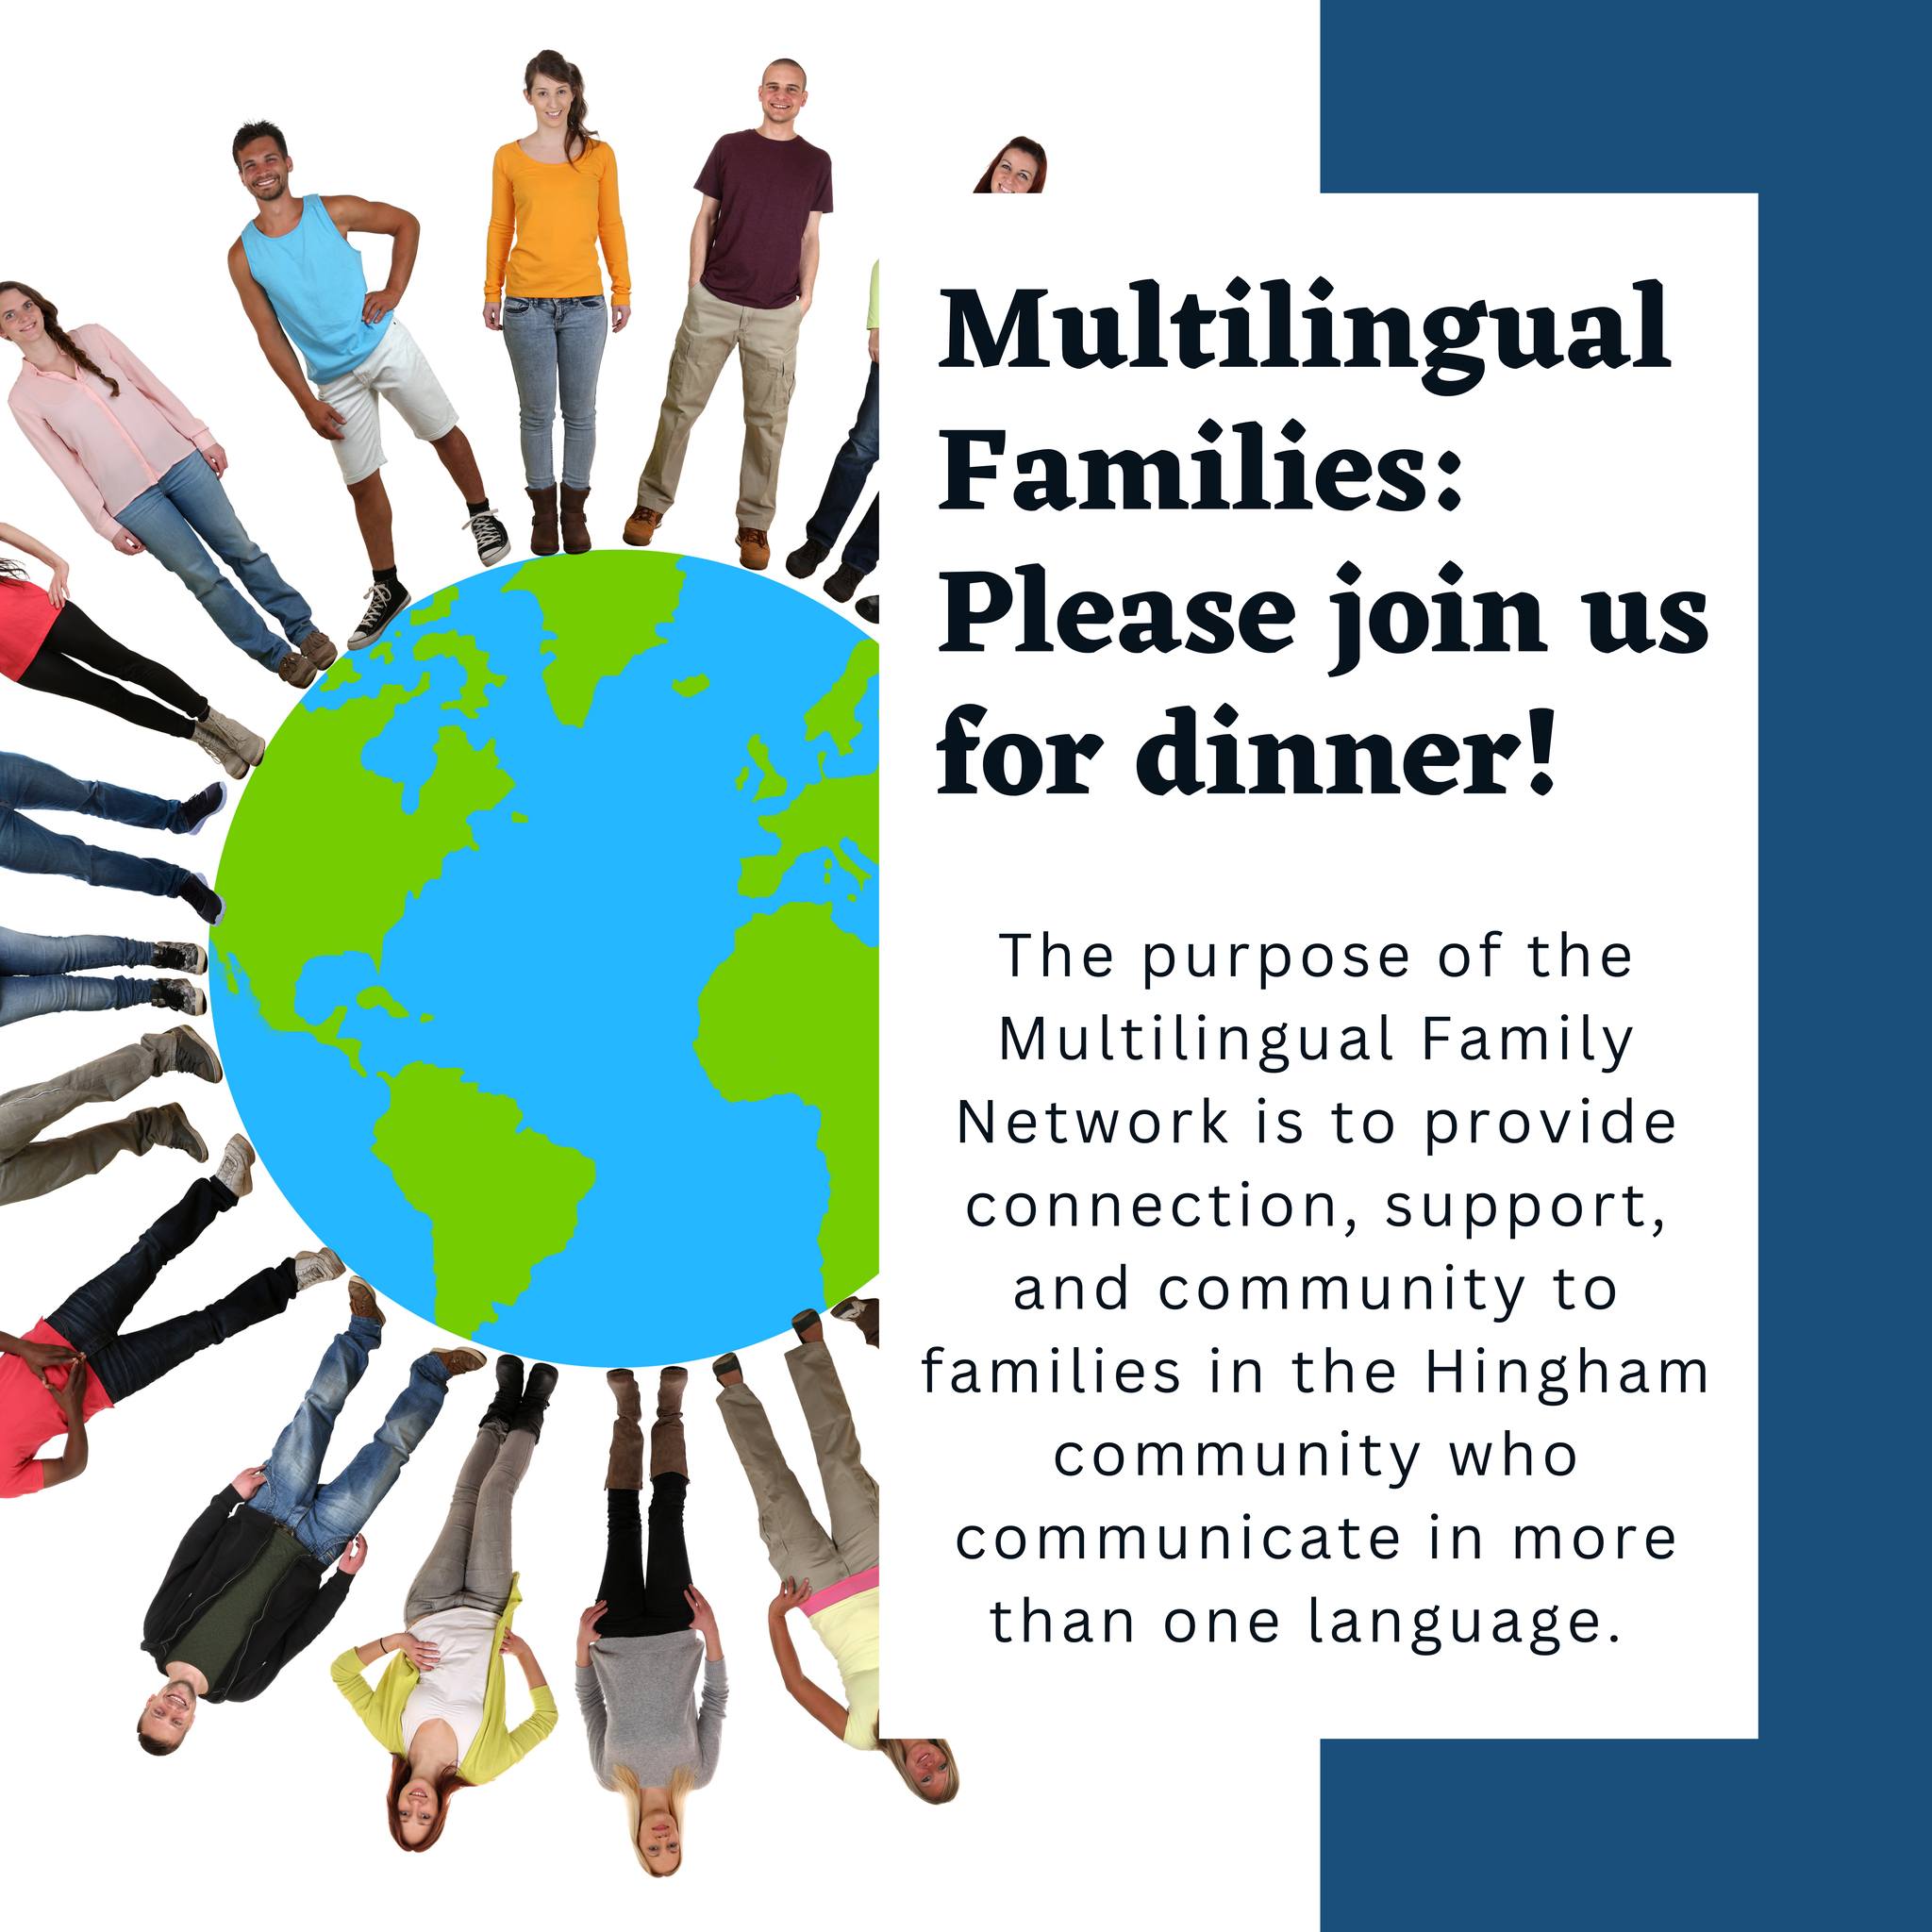 [alt: people standing around the edge of a graphic of Earth. Text reads, "Multilingual Families: Please join us for dinner! The purpose of the Multilingual Family Network is to provide connection, support and community to families in the Hingham community who communicate in more than one language.]